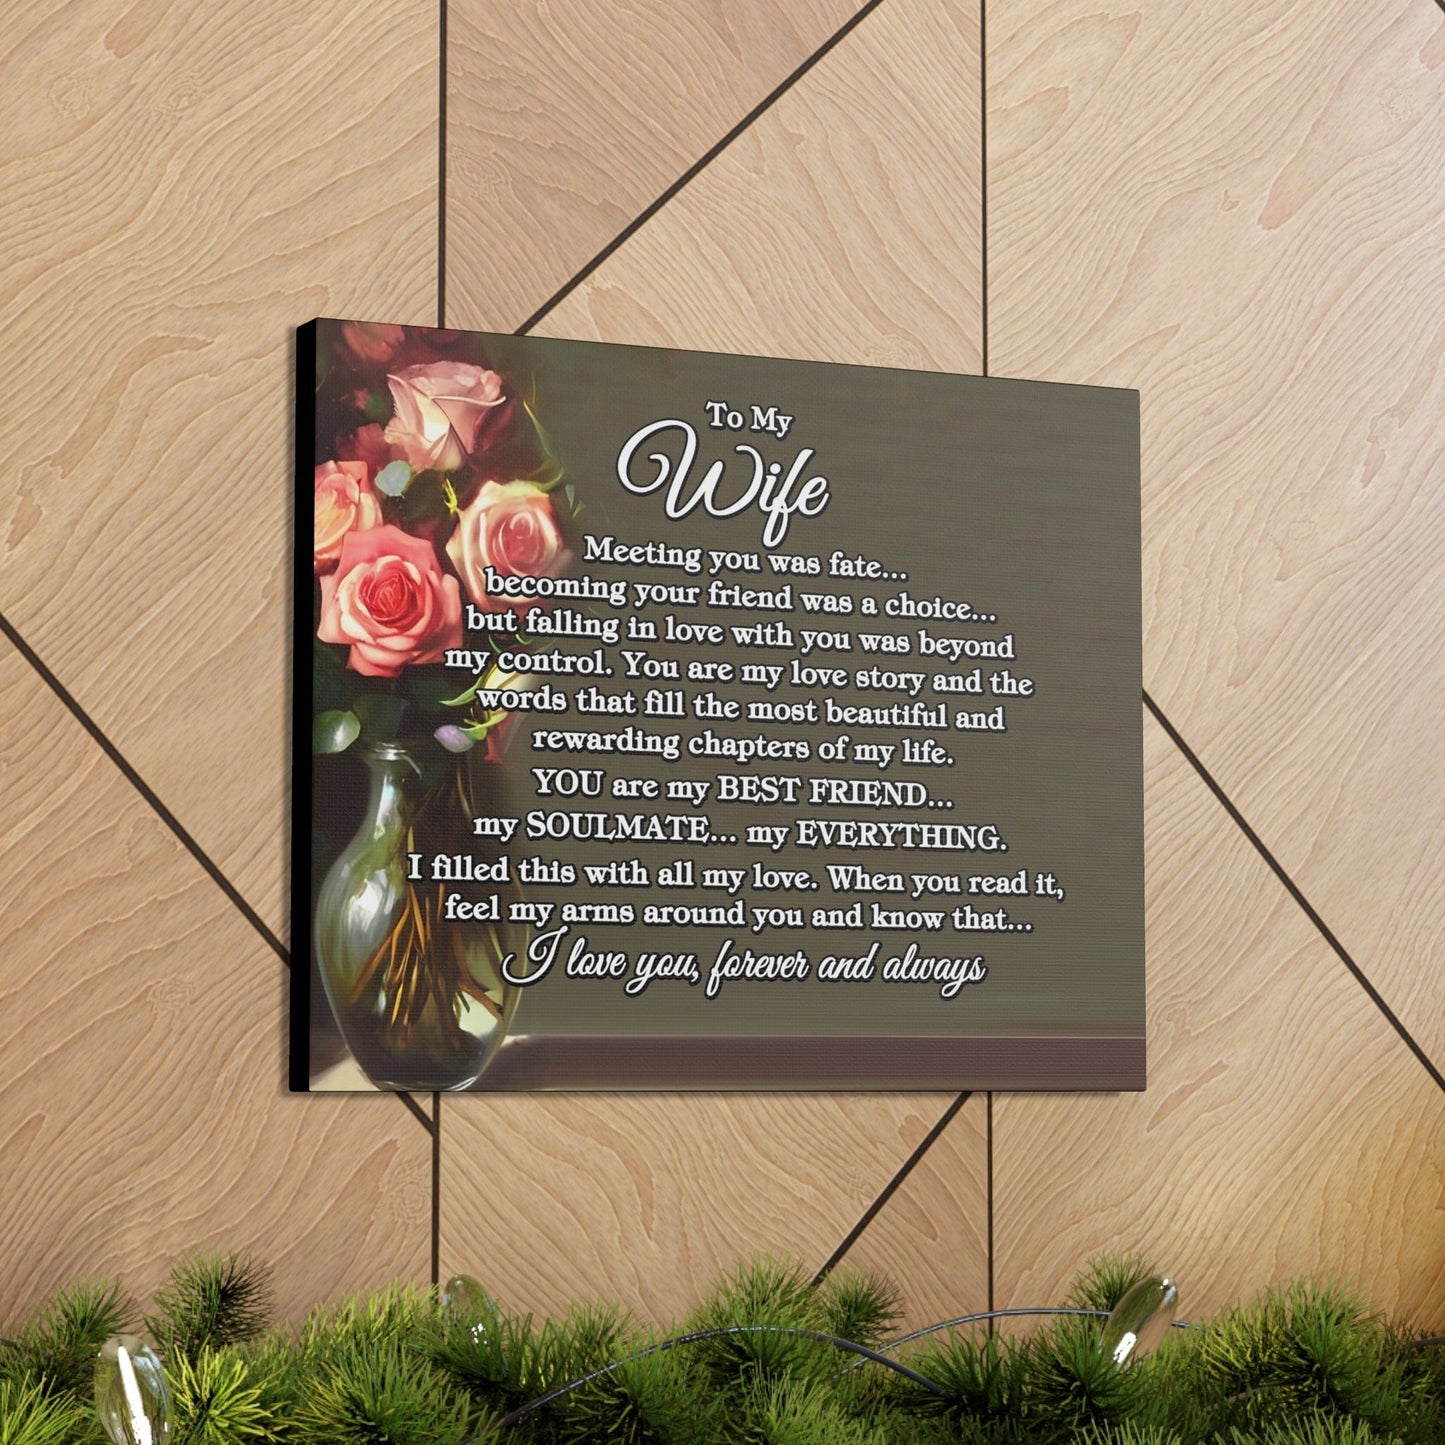 To My Wife "Meeting you was..." Canvas Gallery Wrap (Roses)